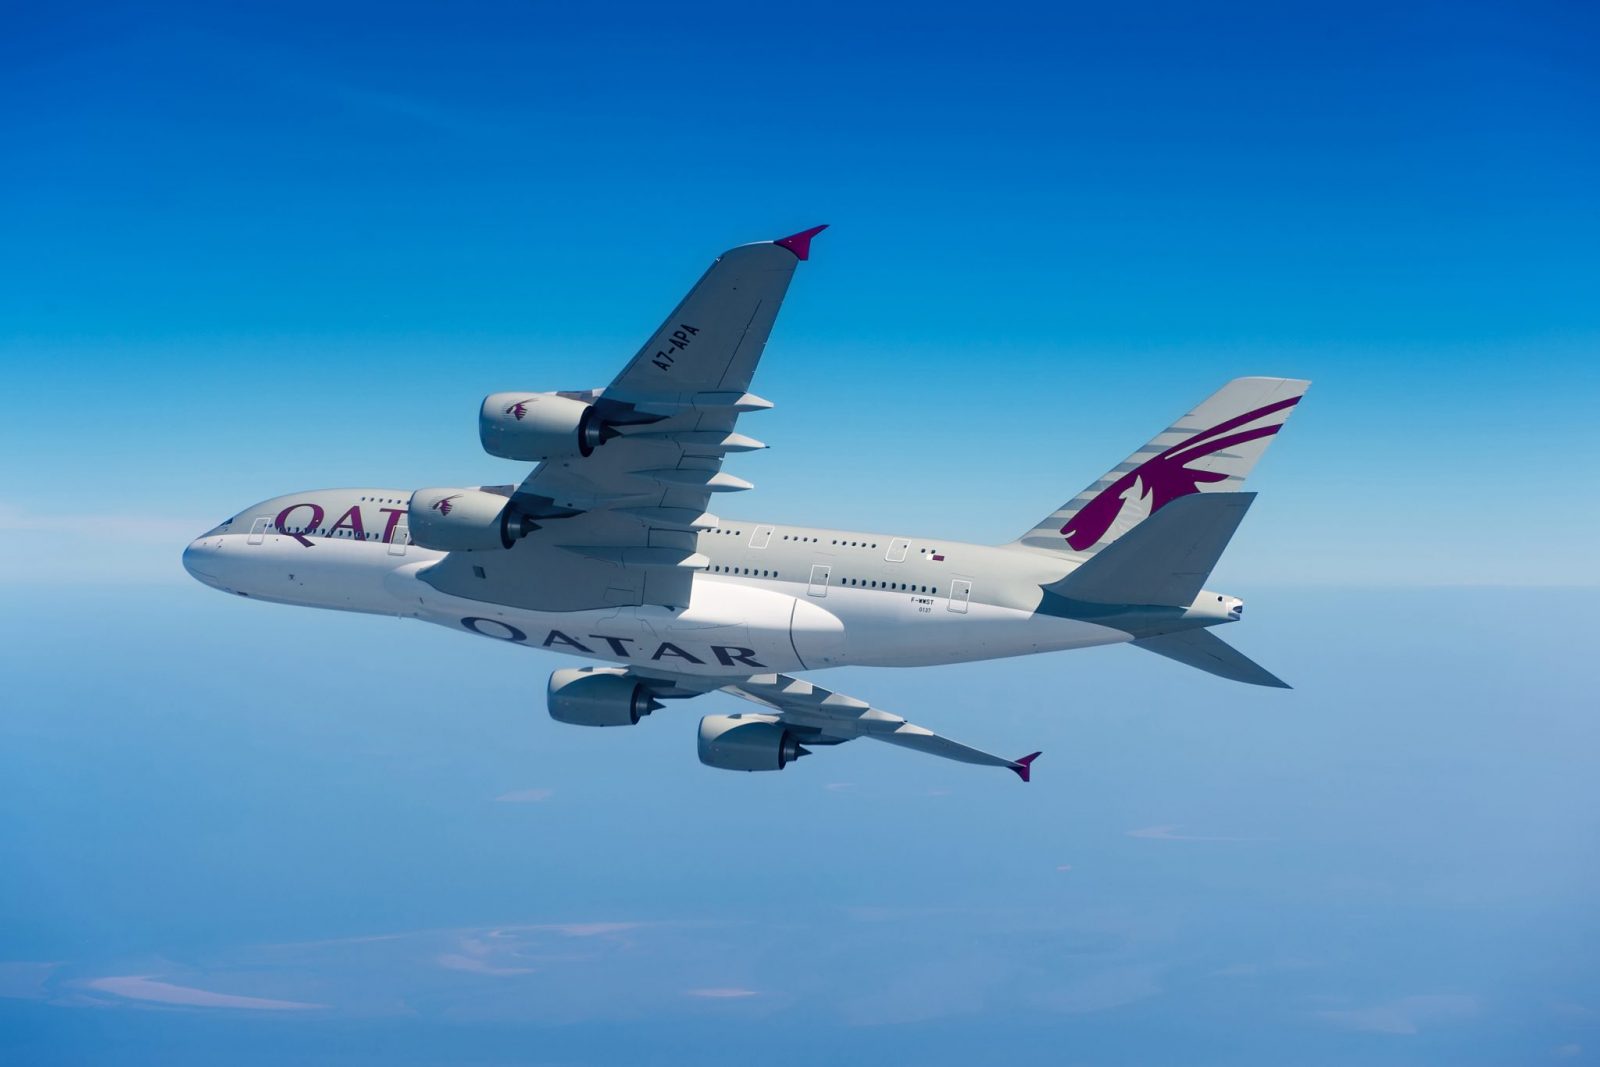 News Roundup – 18th April 2017. A Summary of Airline News from the Past Week - A Qatar Airways A380